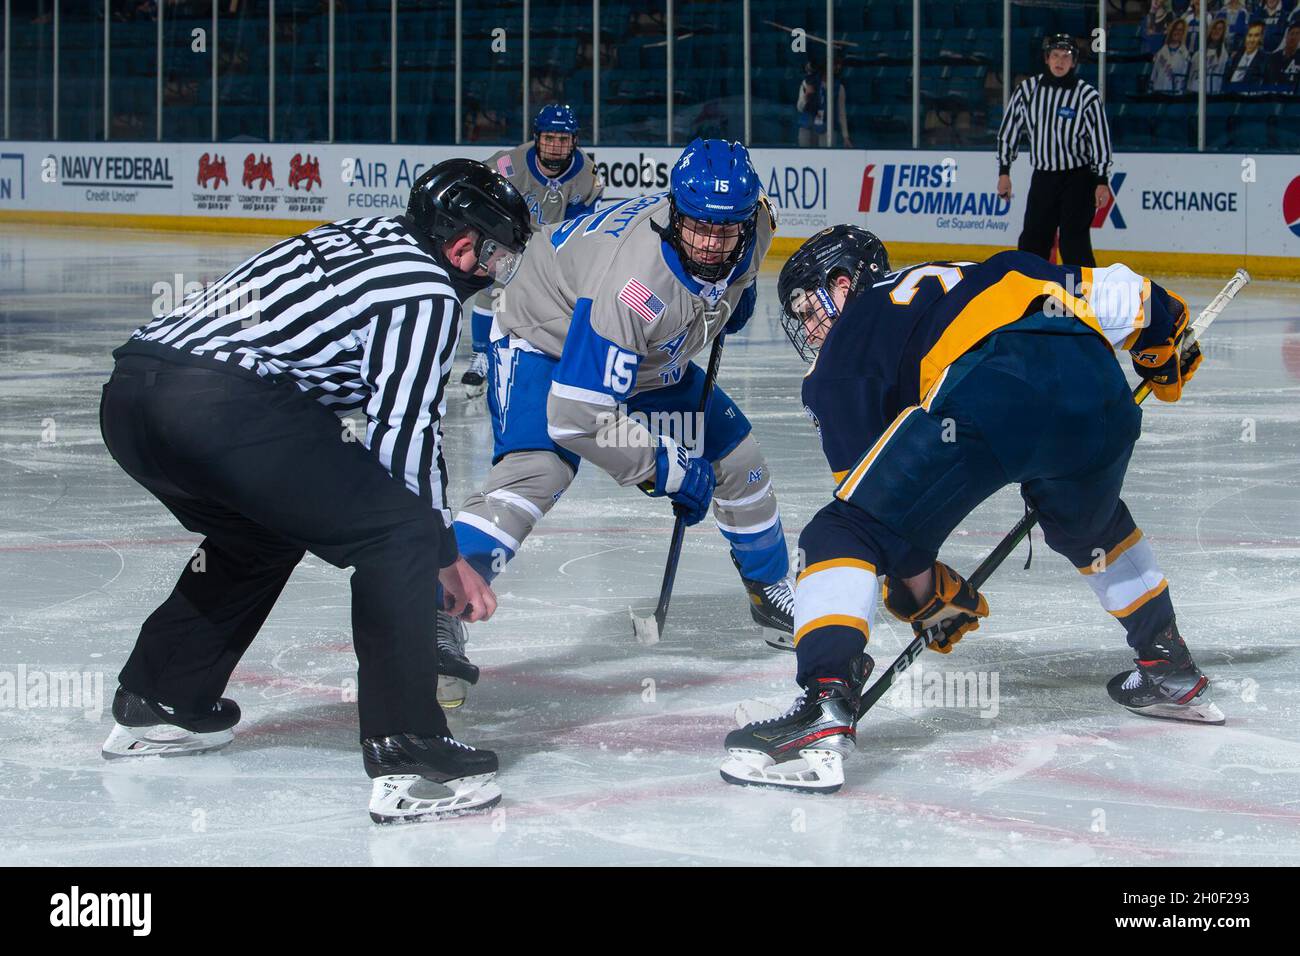 U.S. AIR FORCE ACADEMY, Colo. -- Air Force forward Bennett Norlin faces off against Canisius College forward Matt Long during a game at the Academy’s Cadet Ice Arena, Feb. 19, 2021. Air Force defeated Canisius 4-3. Stock Photo